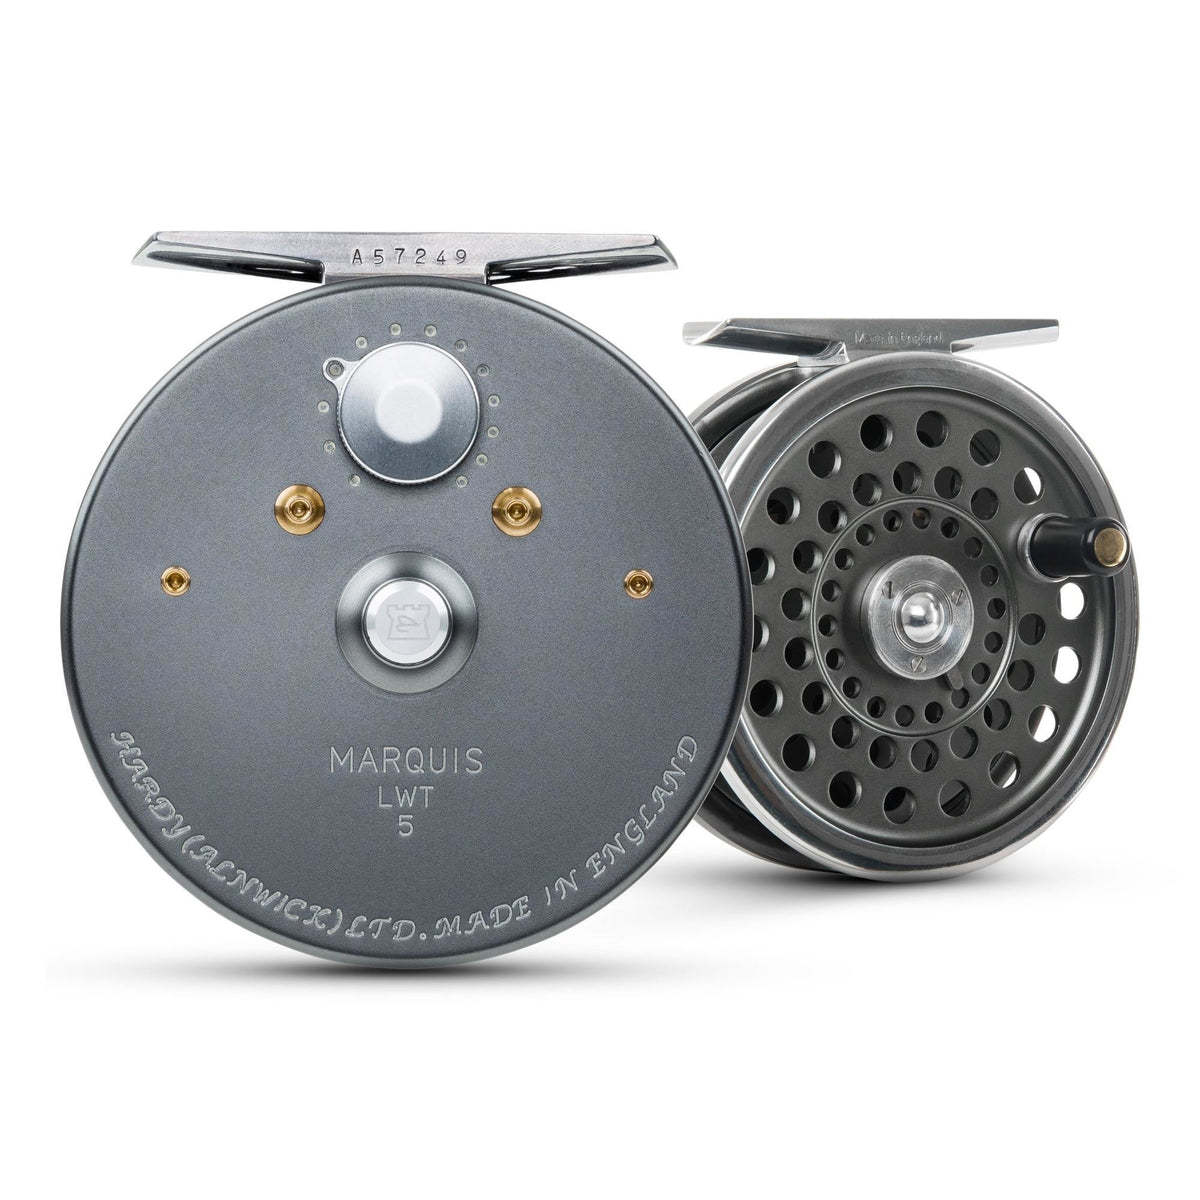 Hardy Marquis #4 fly reel, Rio Gold #4 line and Hardy case